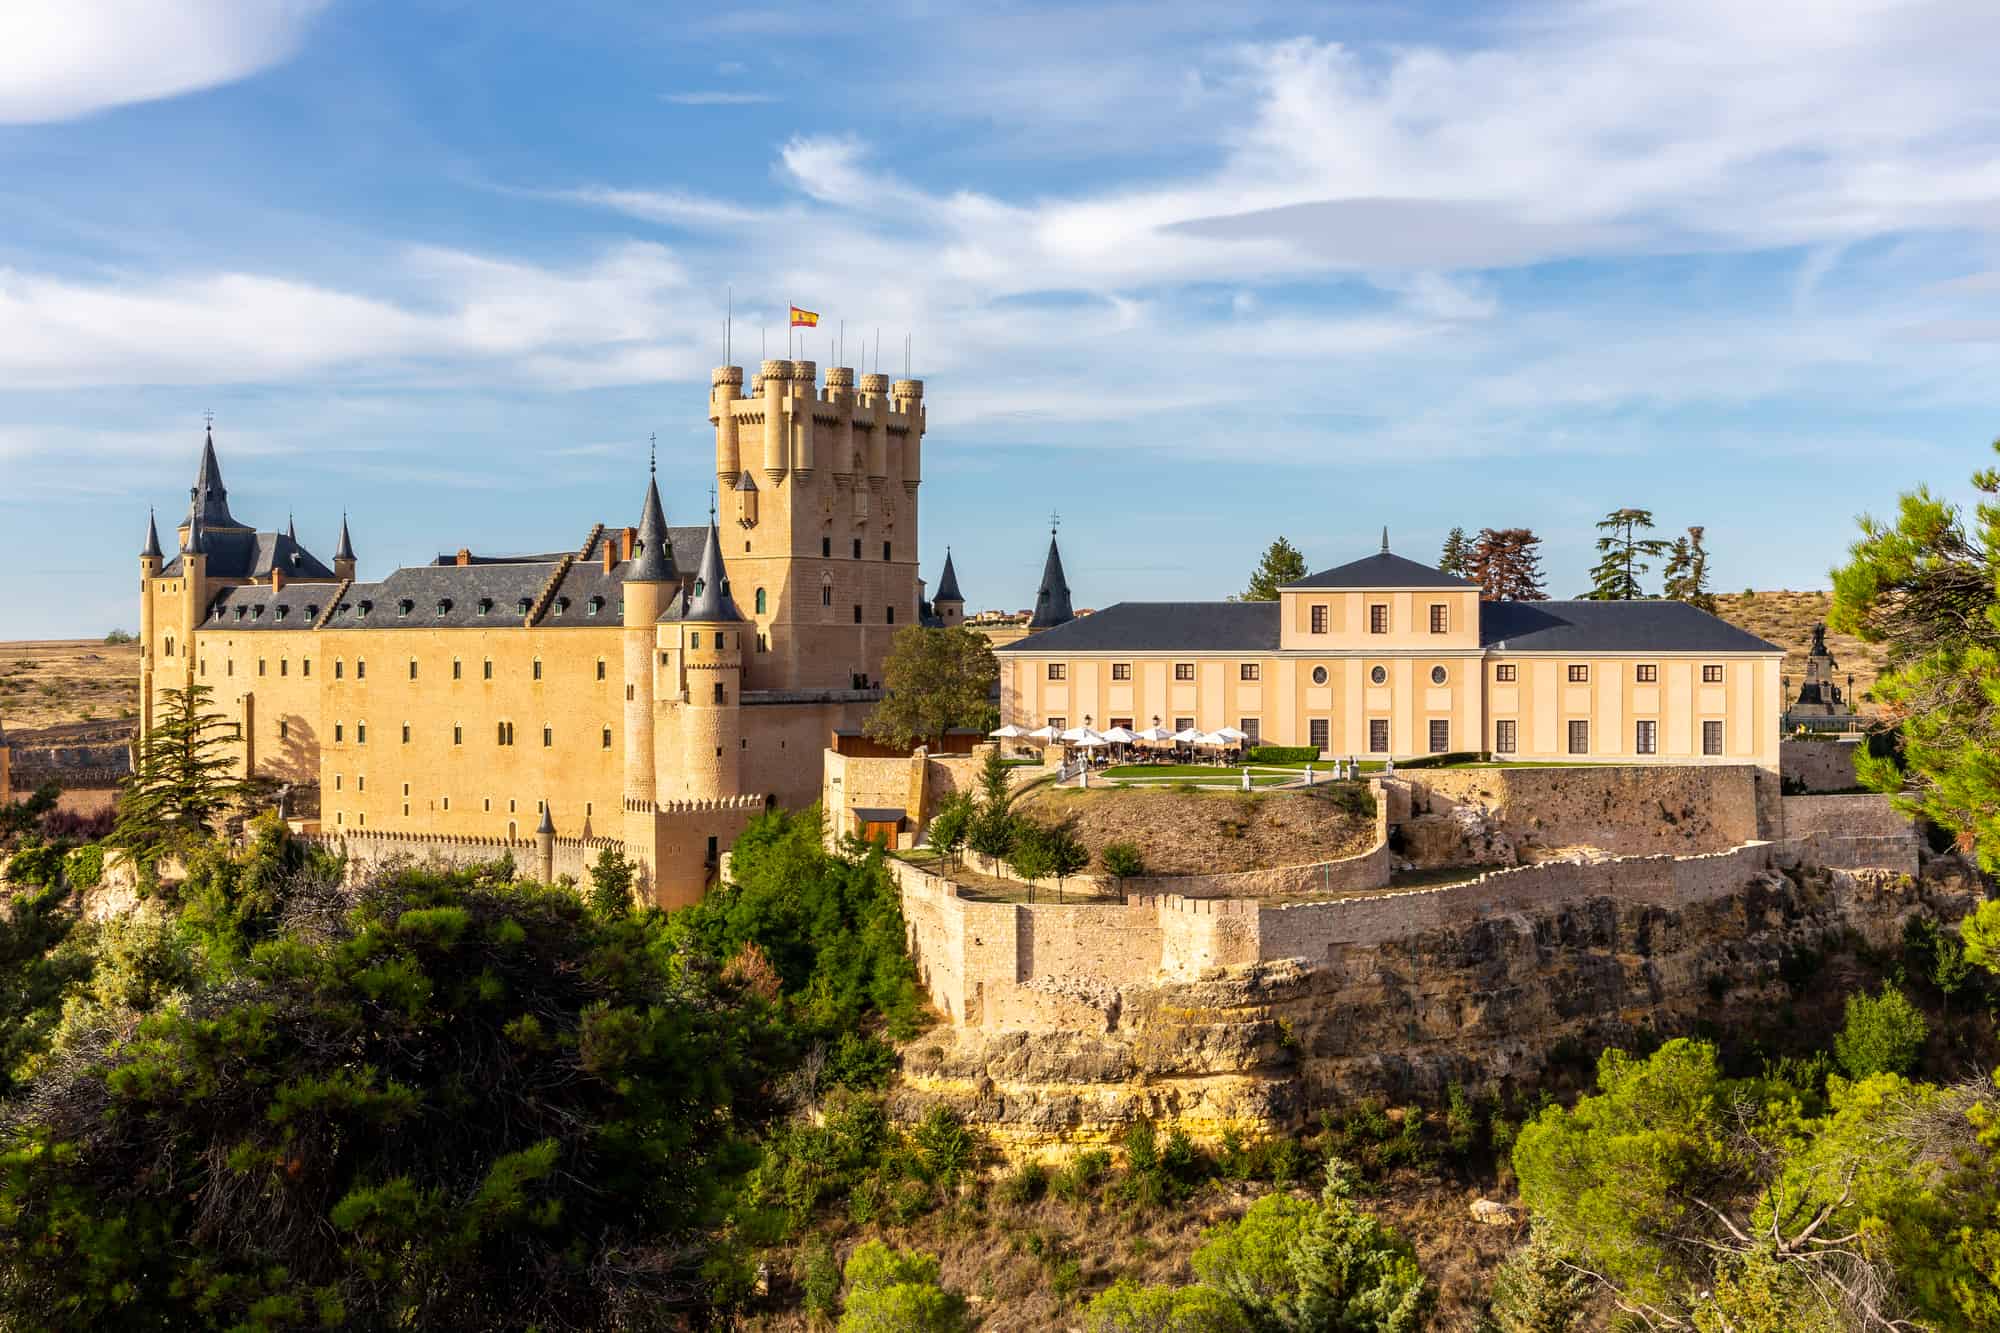 Alcazar of Segovia, Spain, medieval Spanish castle in Gothic architecture style on a hill with the Tower of John II of Castile